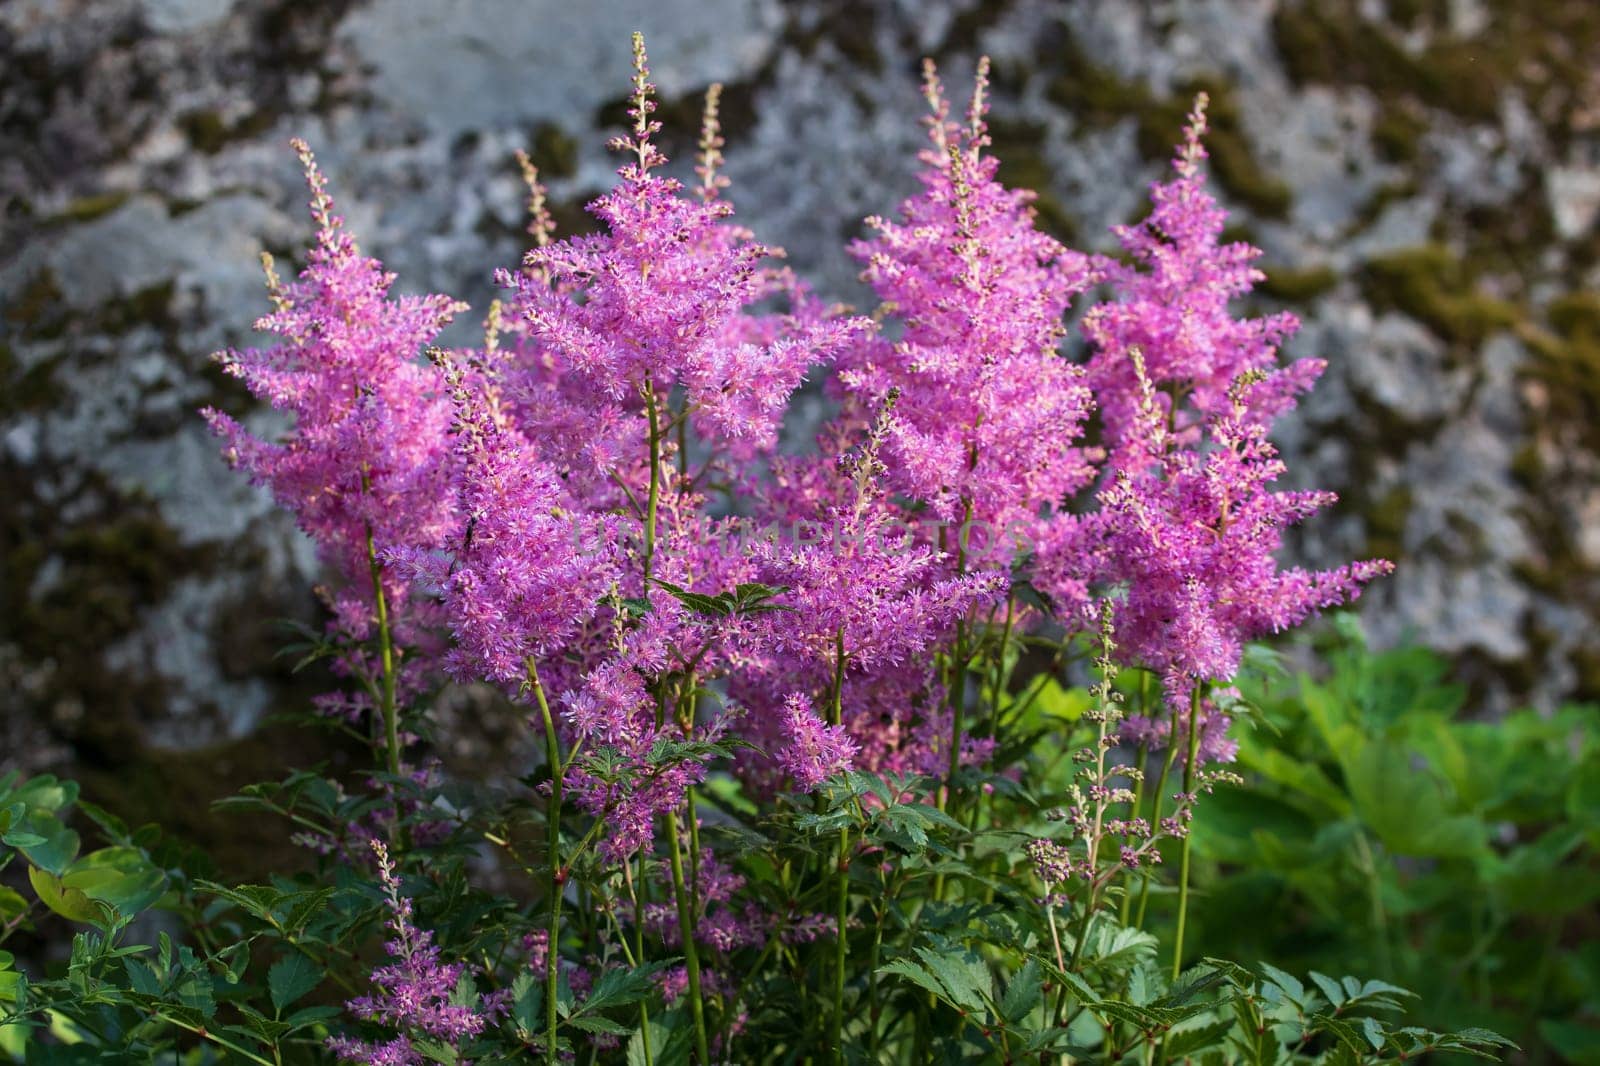 Blooming pink astilbes in a flower bed in the garden.